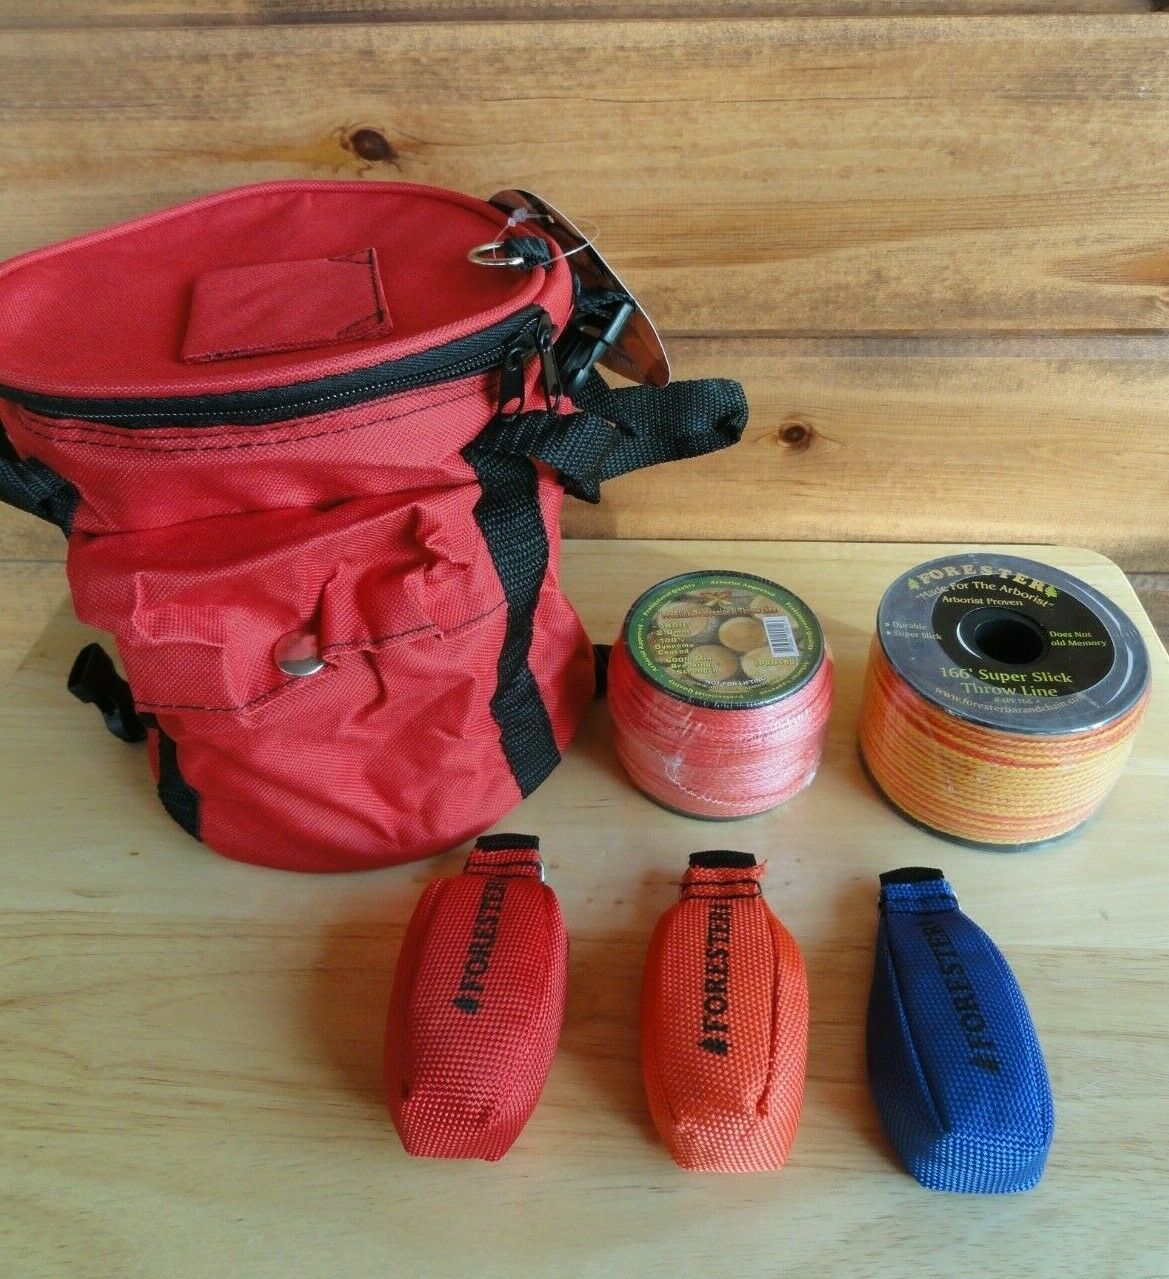 Arborist Tree Workers Throw Line Kit Rope Bag 3 Weight Bags And 2 Rolls Of Line